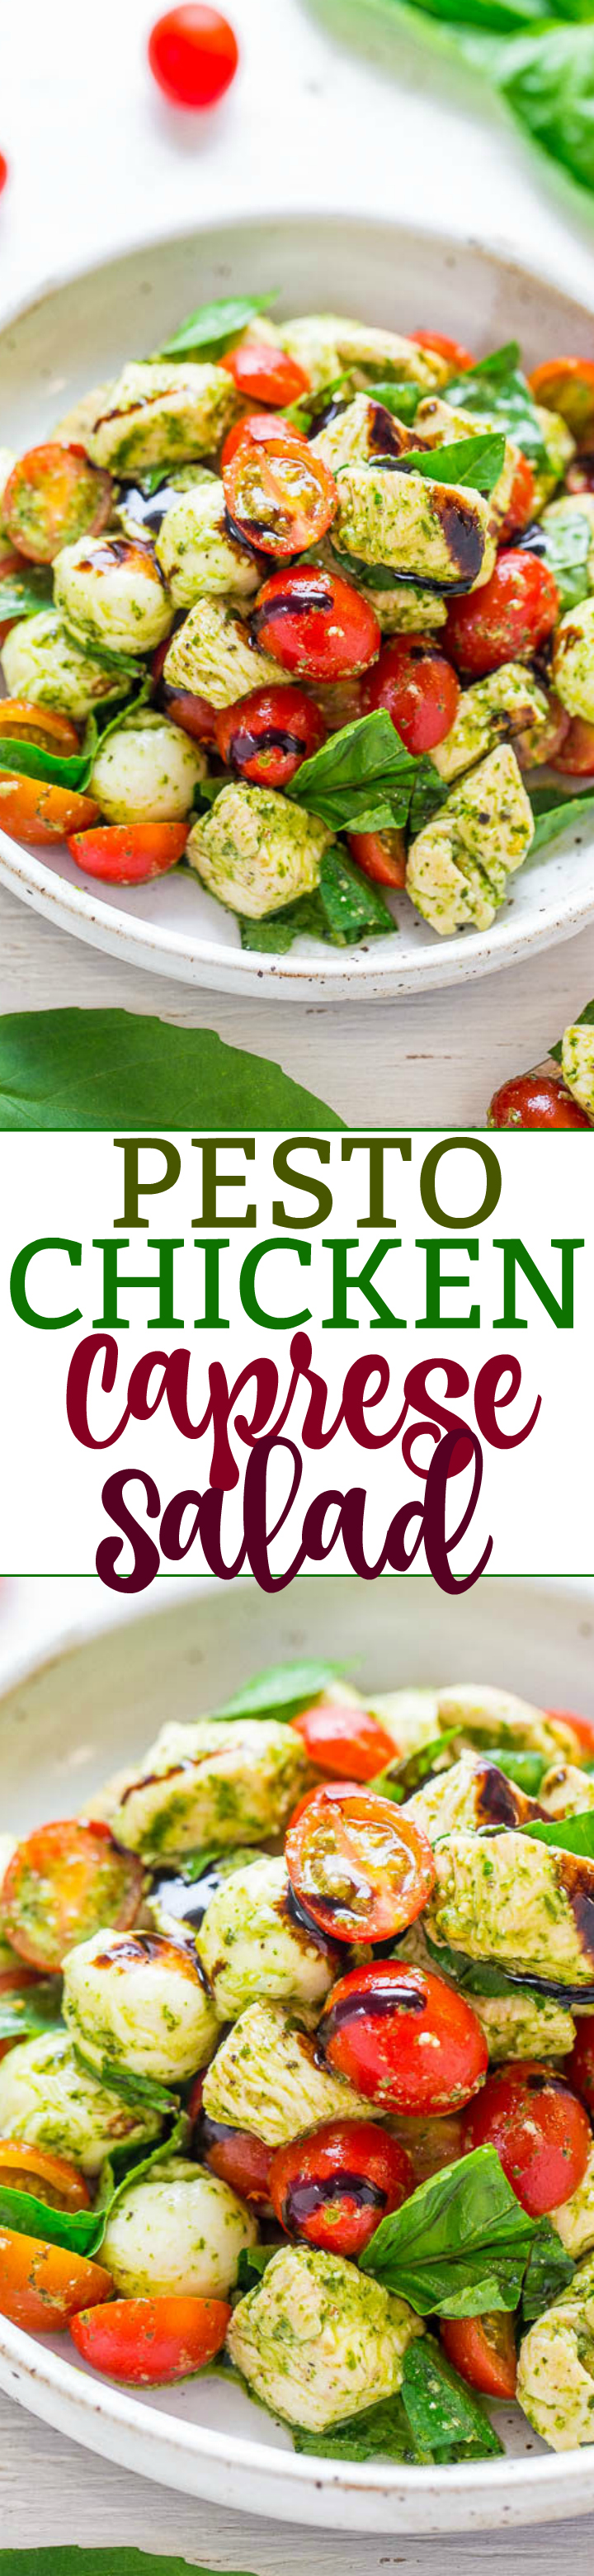 Pesto Chicken Caprese Salad - Homemade pesto coats every bite of JUICY chicken, tomatoes, and fresh mozzarella in this fun twist on caprese salad!! EASY, ready in 20 minutes, and loaded with rich basil flavor!!